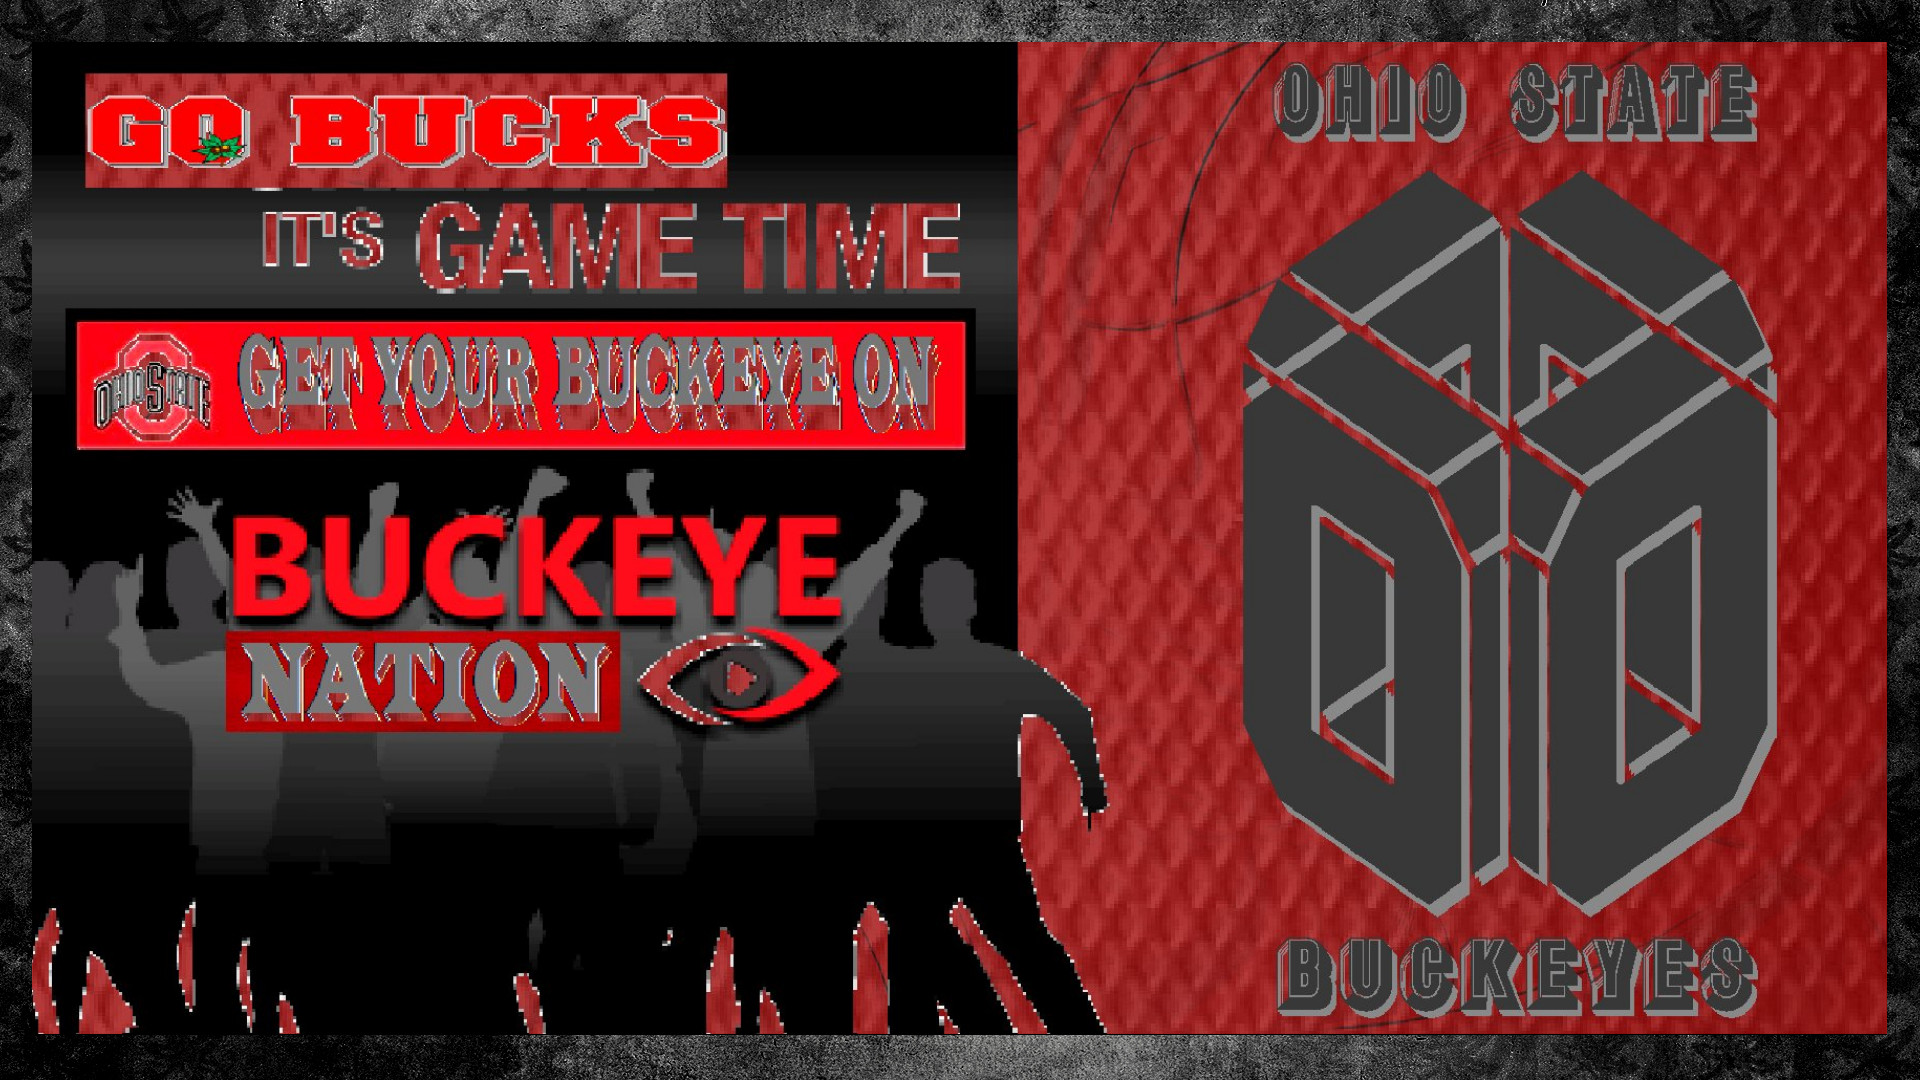 1920x1080 Ohio State Buckeyes images go bucks it's game time HD wallpaper and  background photos